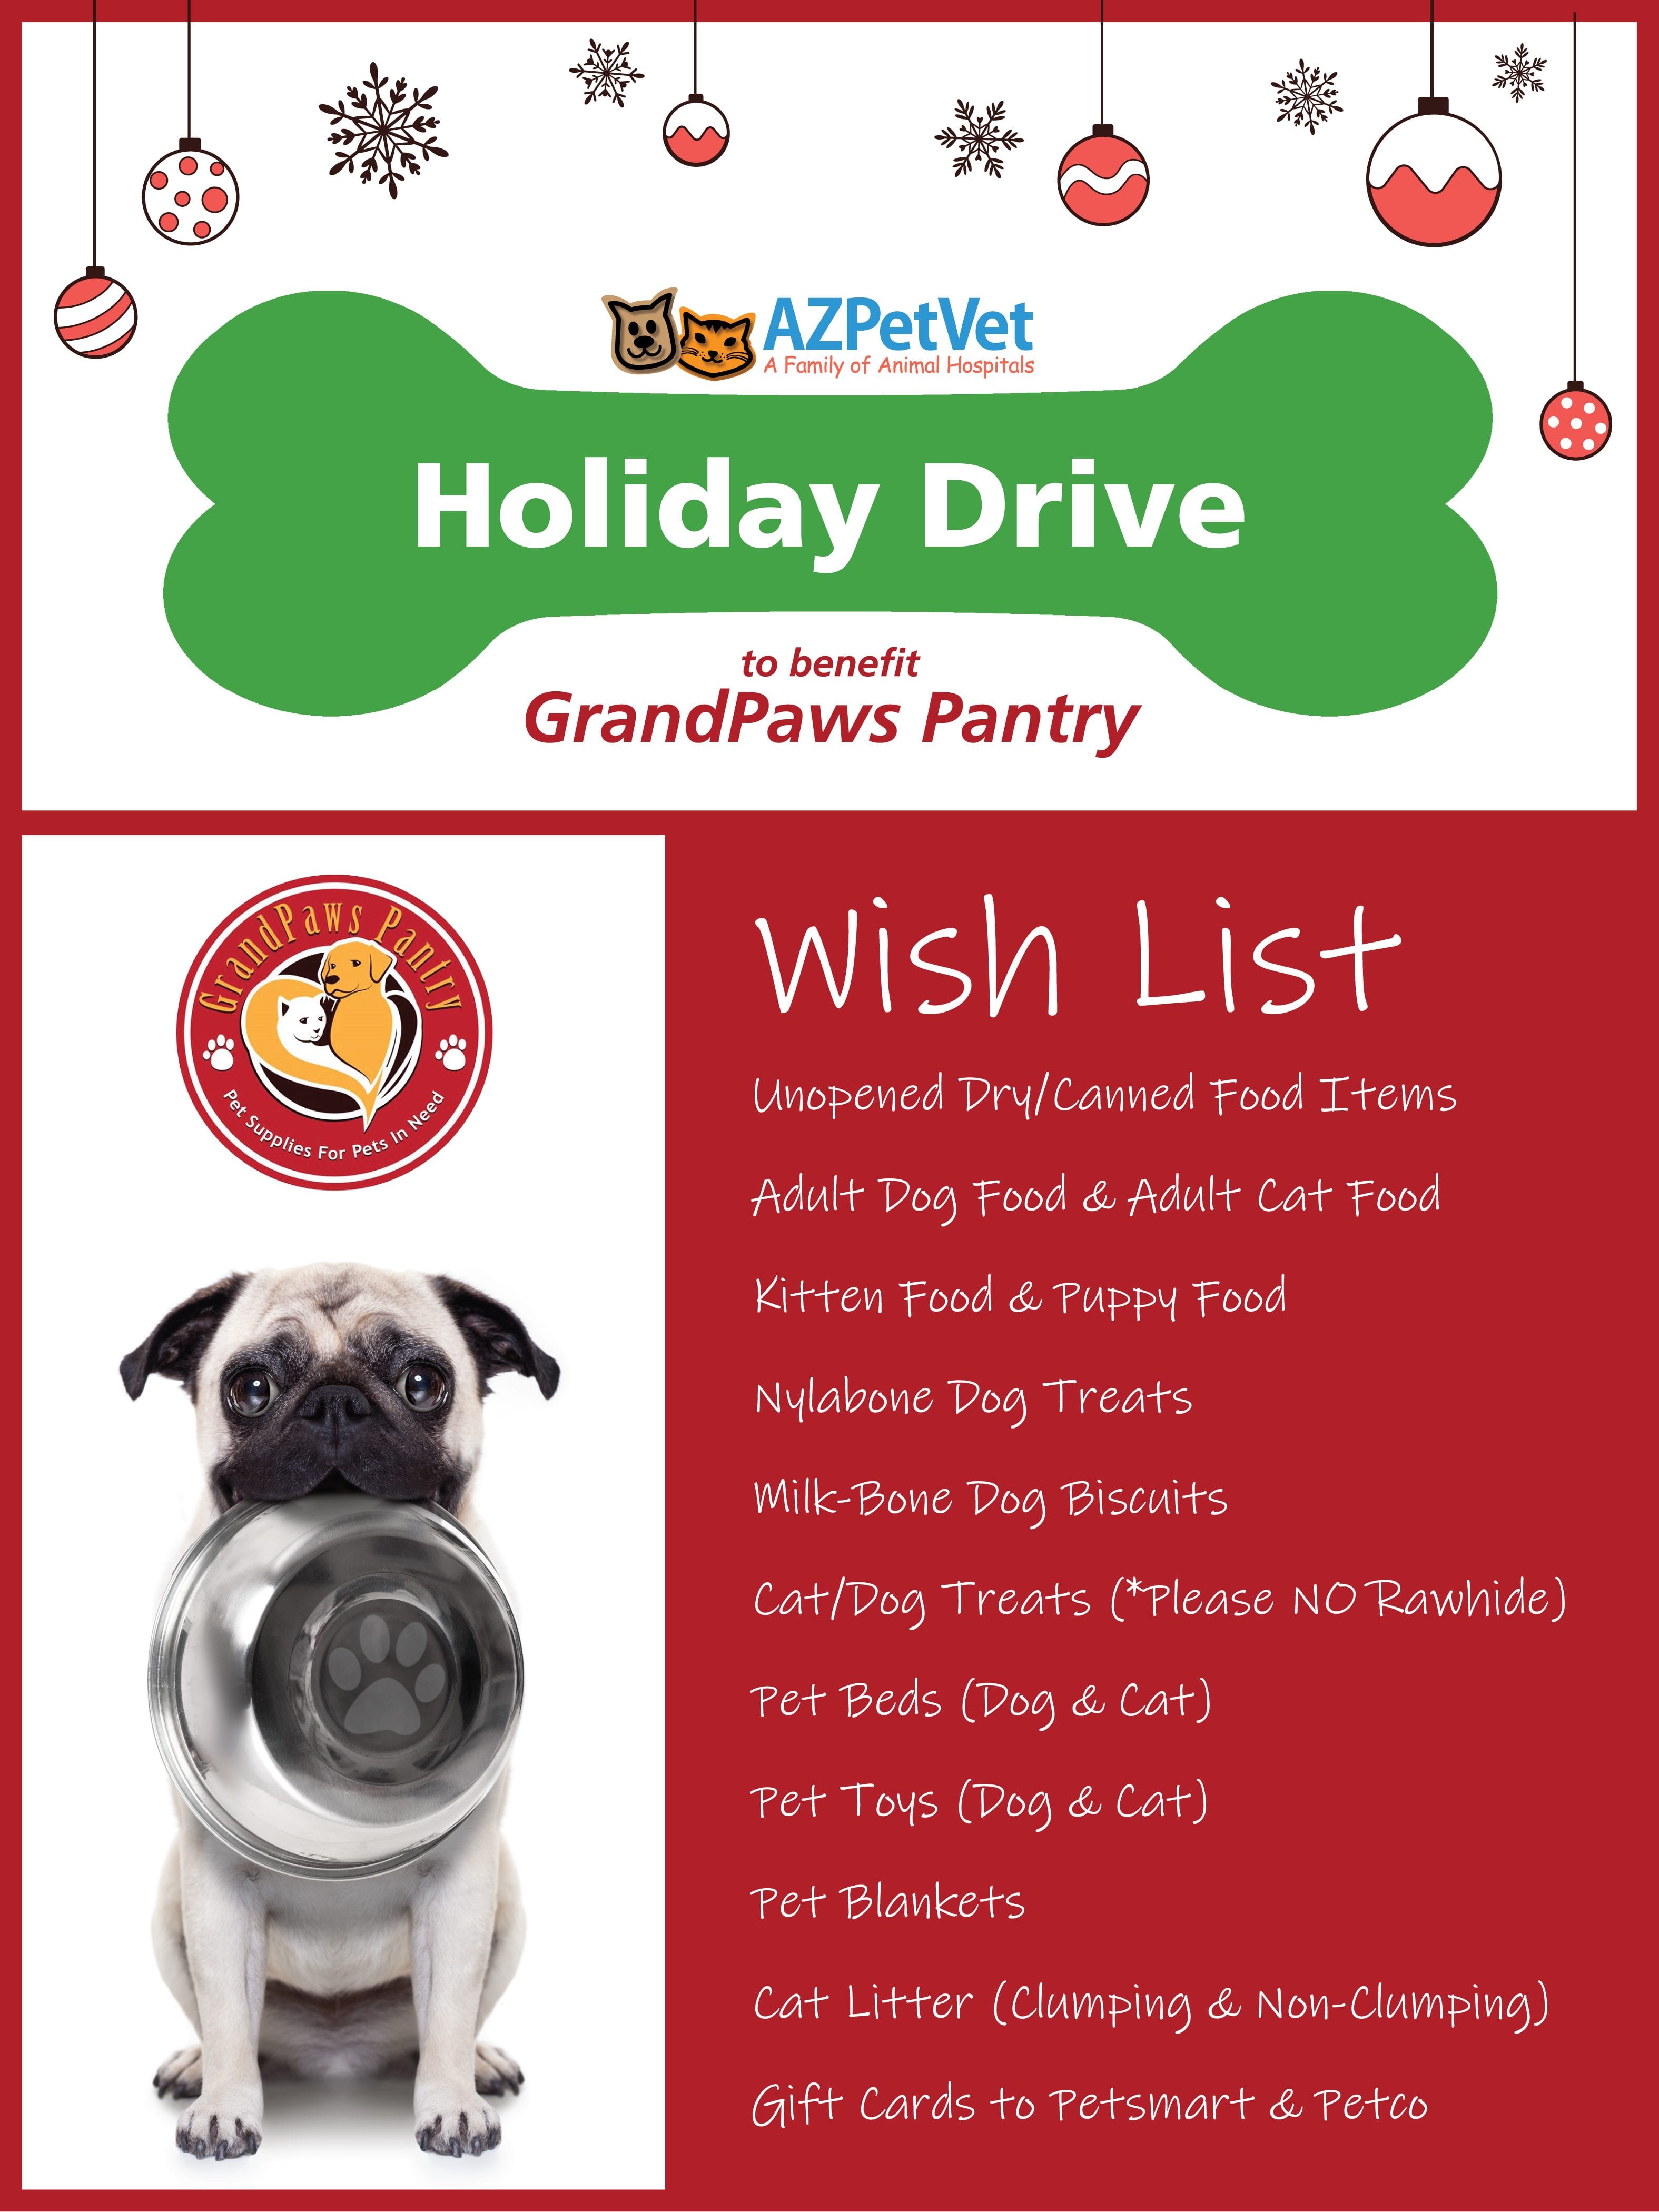 2019 Holiday Donation Drive Announcement - AZPetVet